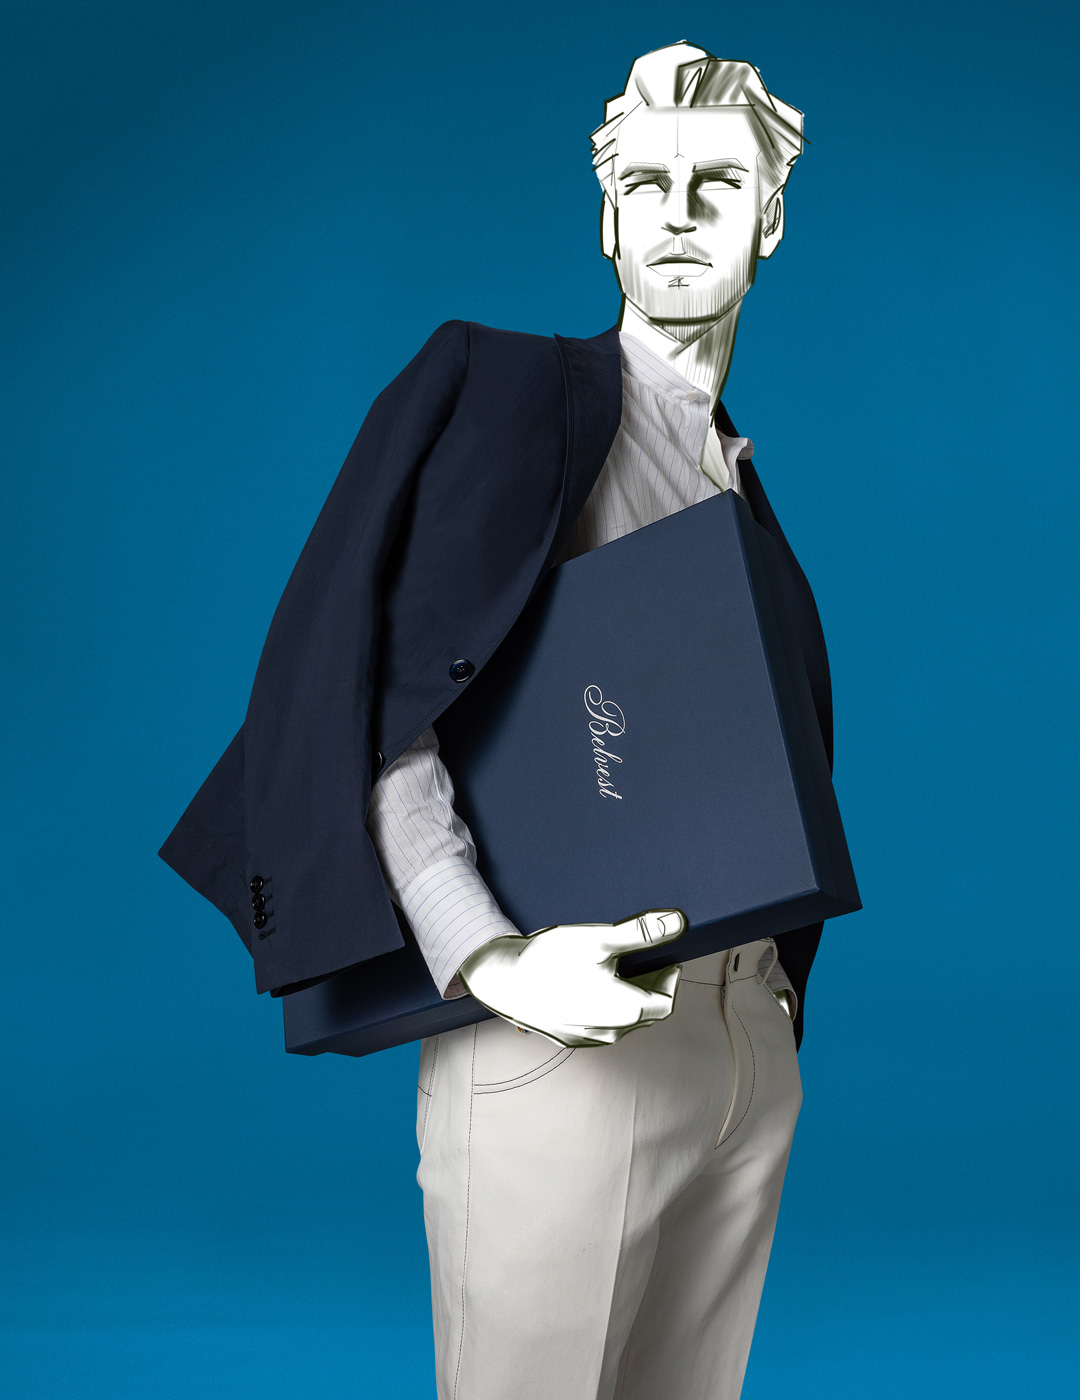 The unstructured jacket “Jacket in the box” (Jacketinthebox ©)